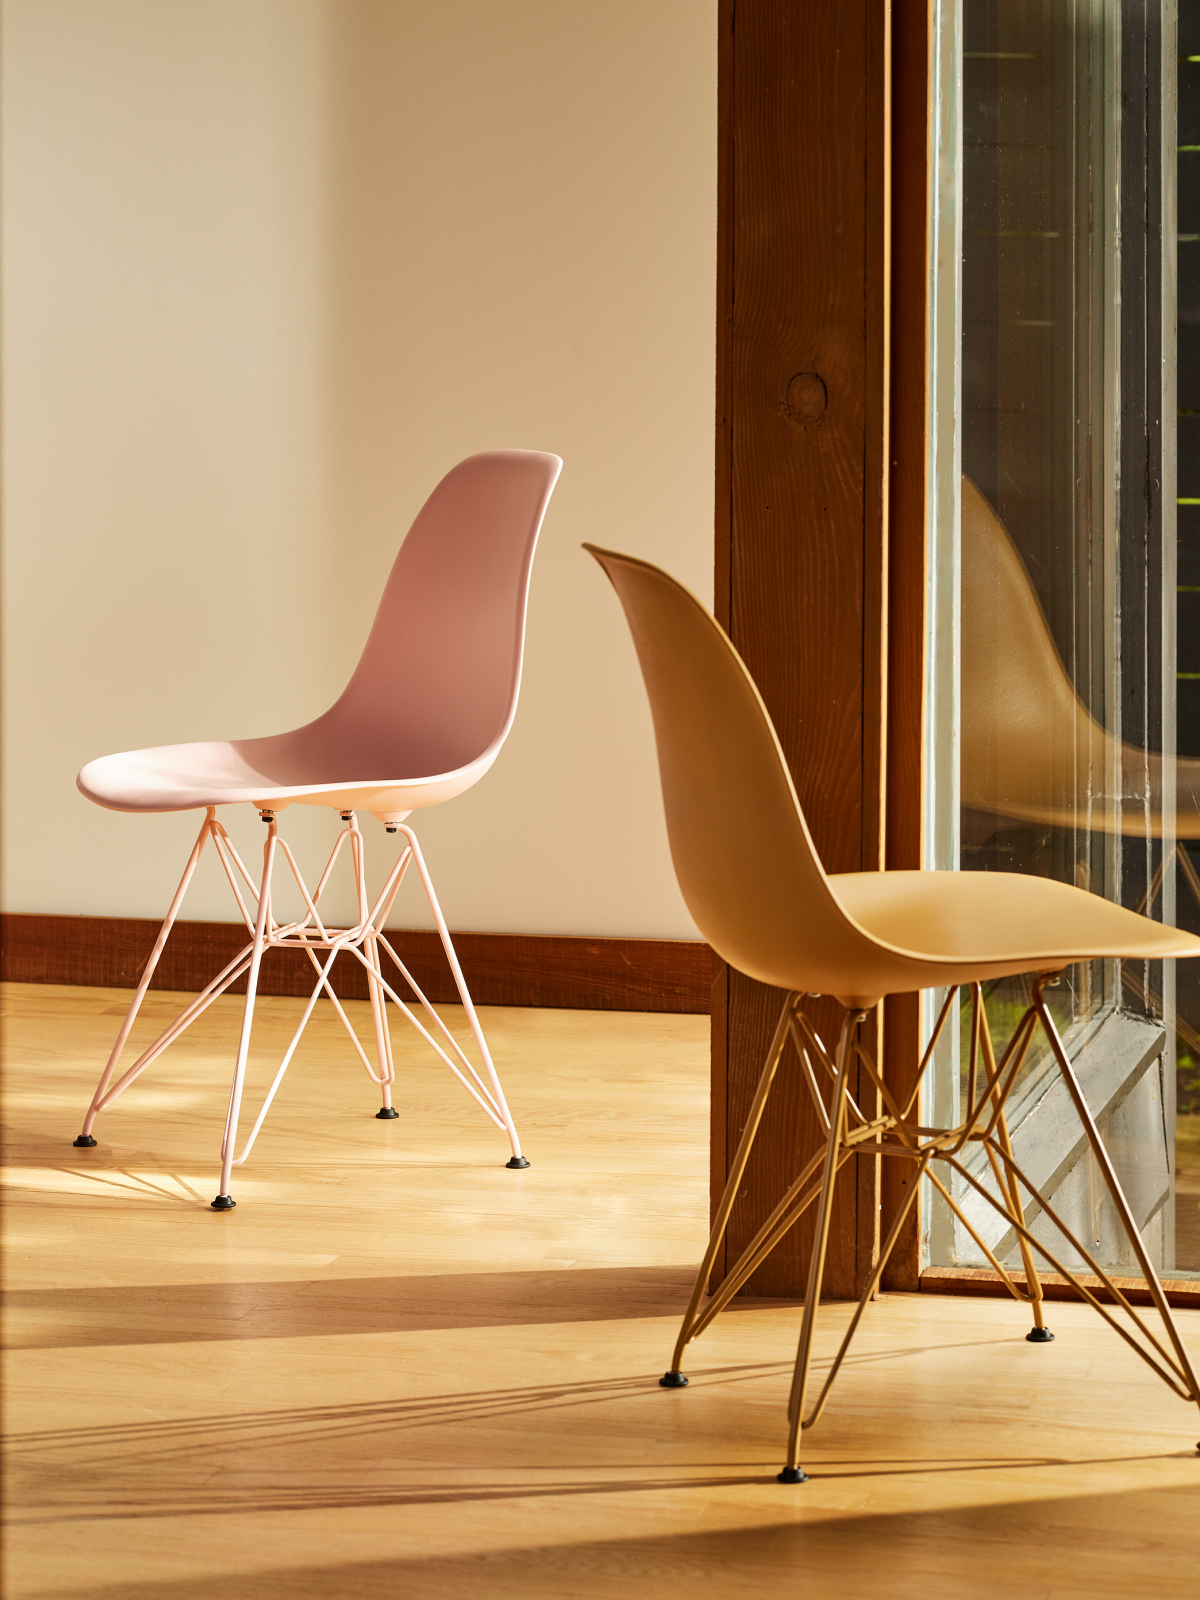 Herman Miller x HAY Eames Moulded Plastic Chairs in pink and toffee.